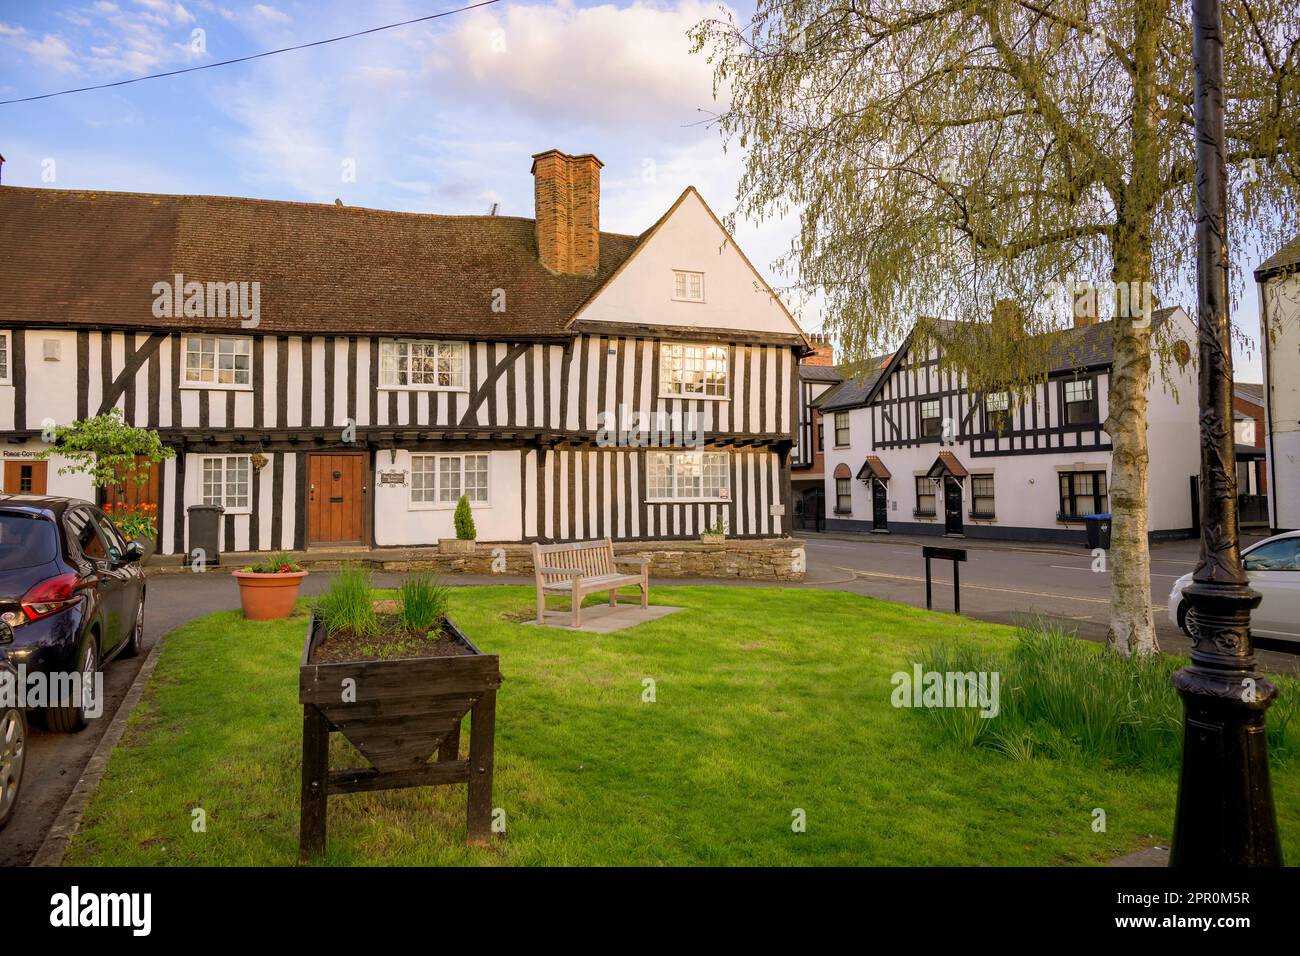 The building known locally as Guy Fawkes house, which was an inn used by the gunpowder plotters. Located in Dunchurch village centre, Warwickshire. Stock Photo